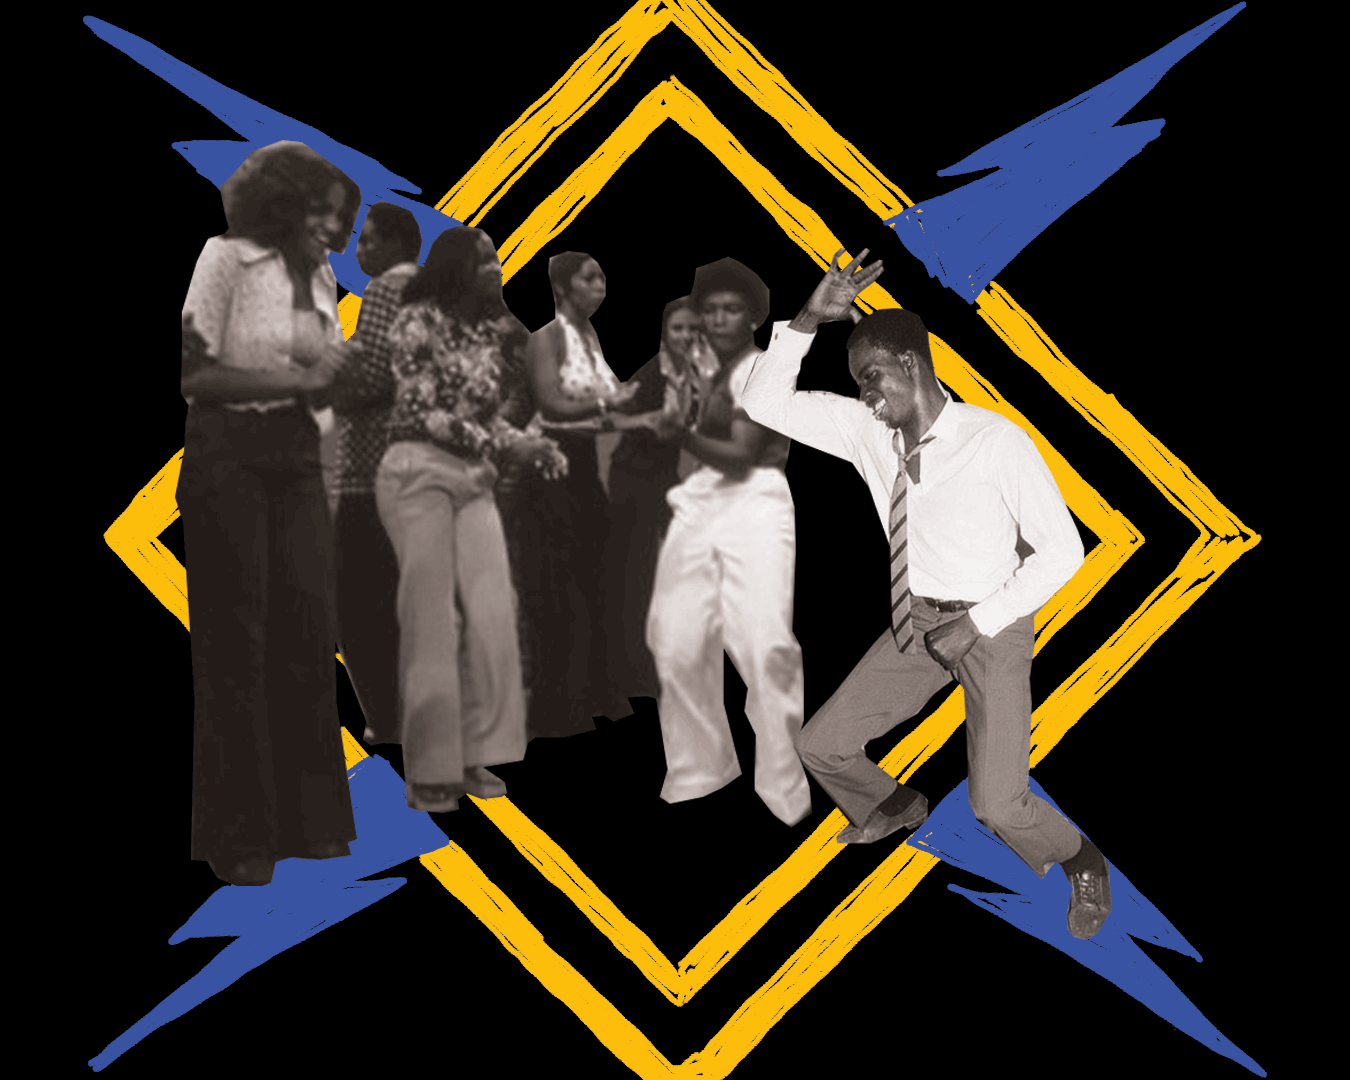 Black and white collage of people dancing overlaying a blue and yellow illustration on a black background.